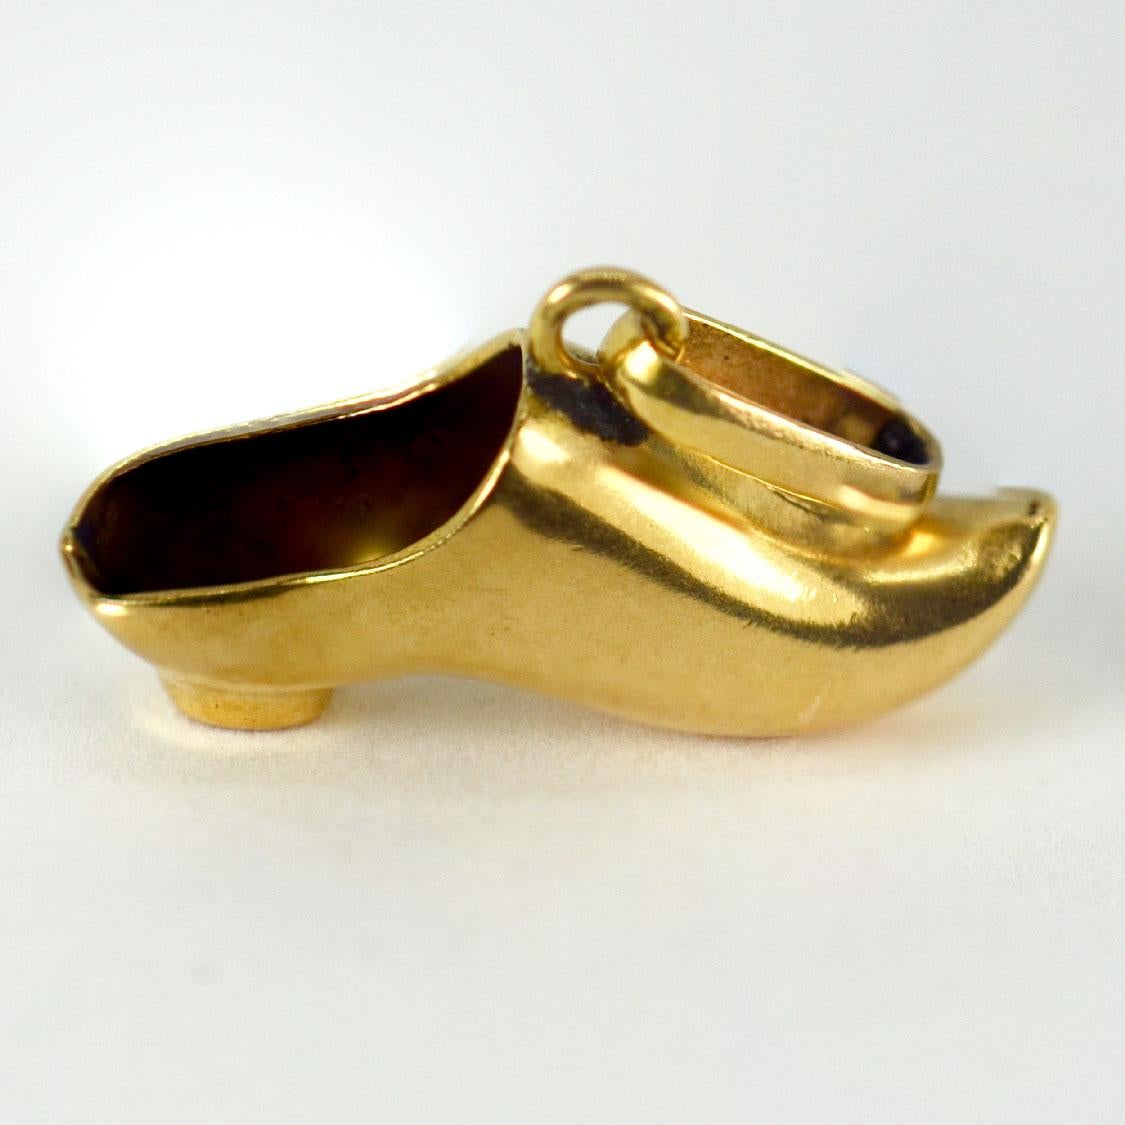 A French 18 karat (18K) yellow gold charm pendant designed as a shoe. Stamped with the eagles head for French manufacture and 18 karat gold with an unknown maker’s mark.

Dimensions: 1 x 1.8 x 0.55 cm (not including jump ring)
Weight: 0.78 grams
